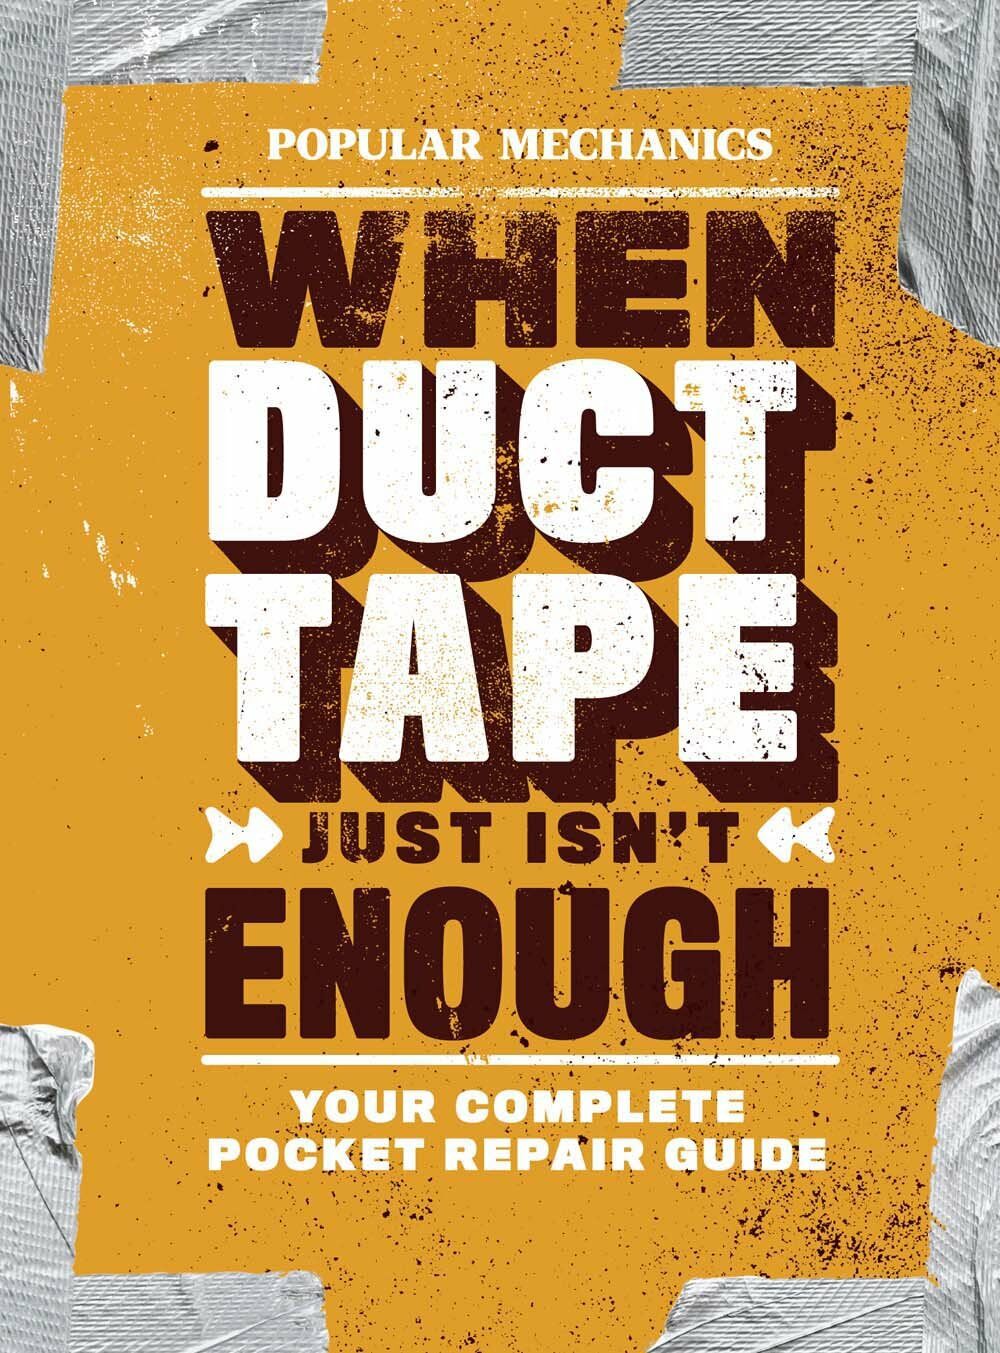 Popular Mechanics When Duct Tape Just Isnt Enough: Your Complete Pocket Repair Guide (Paperback)